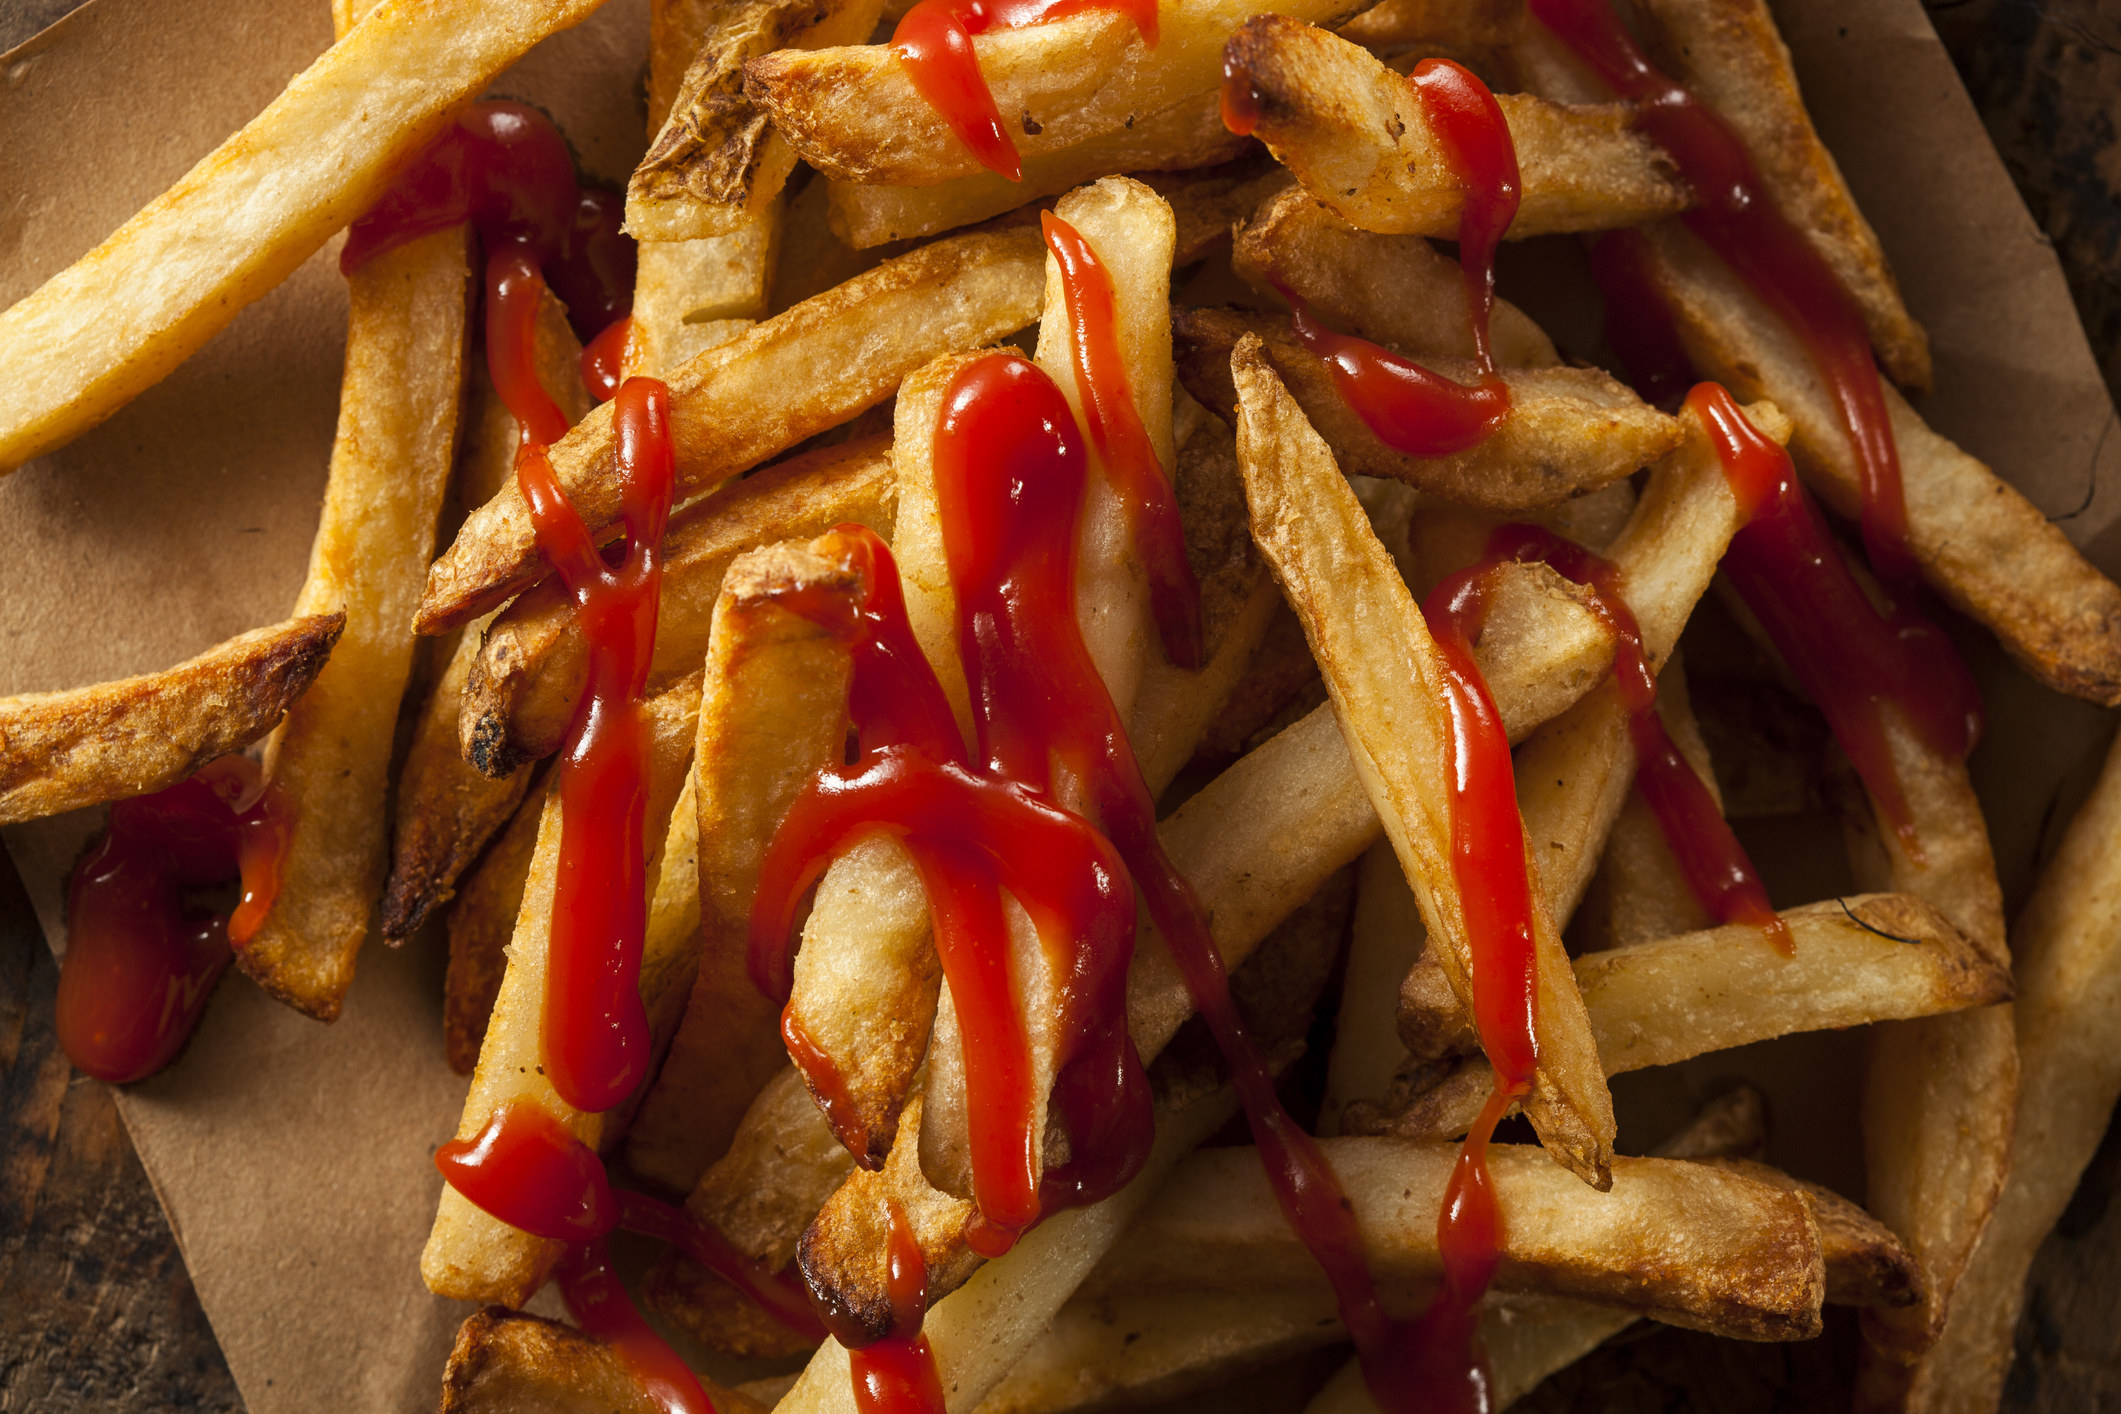 French fries topped with ketchup.